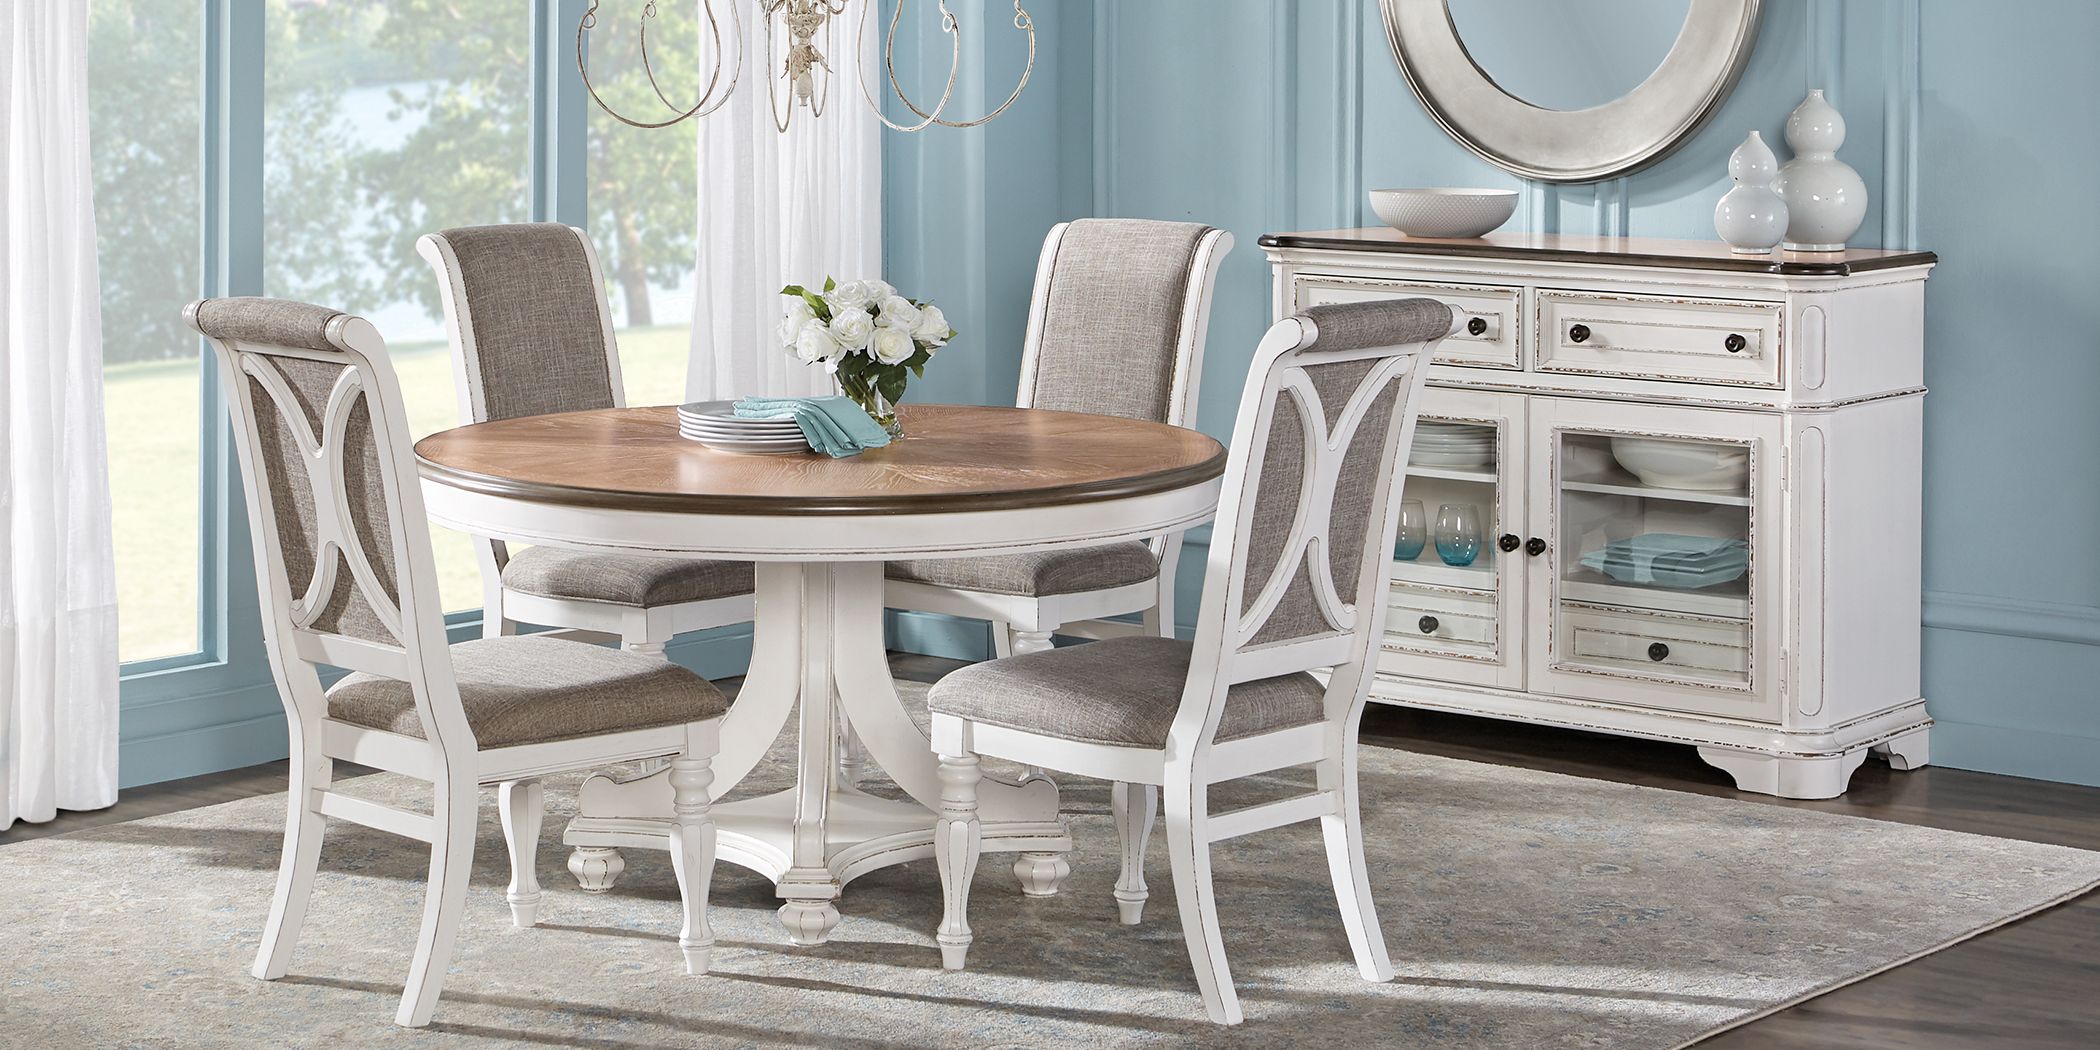 Rooms To Go Dining Room Sets Round Table